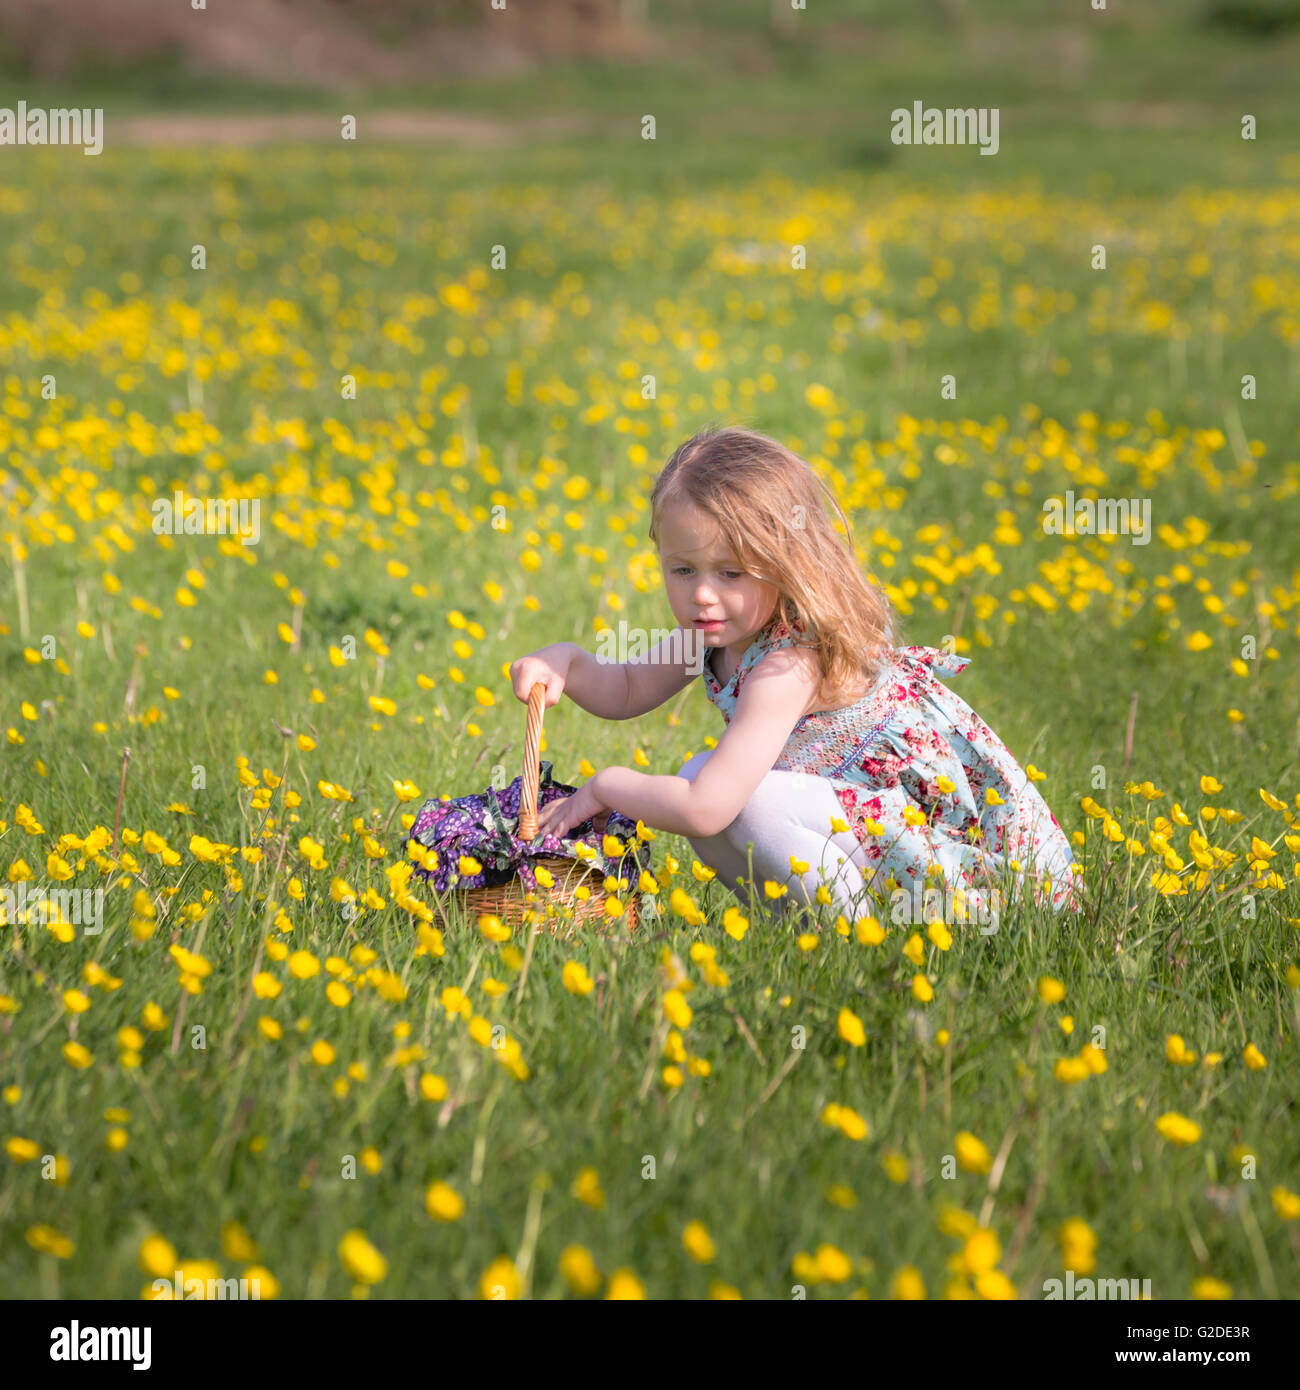 a 3 year old girl is picking yellow flowers in a basket Stock Photo